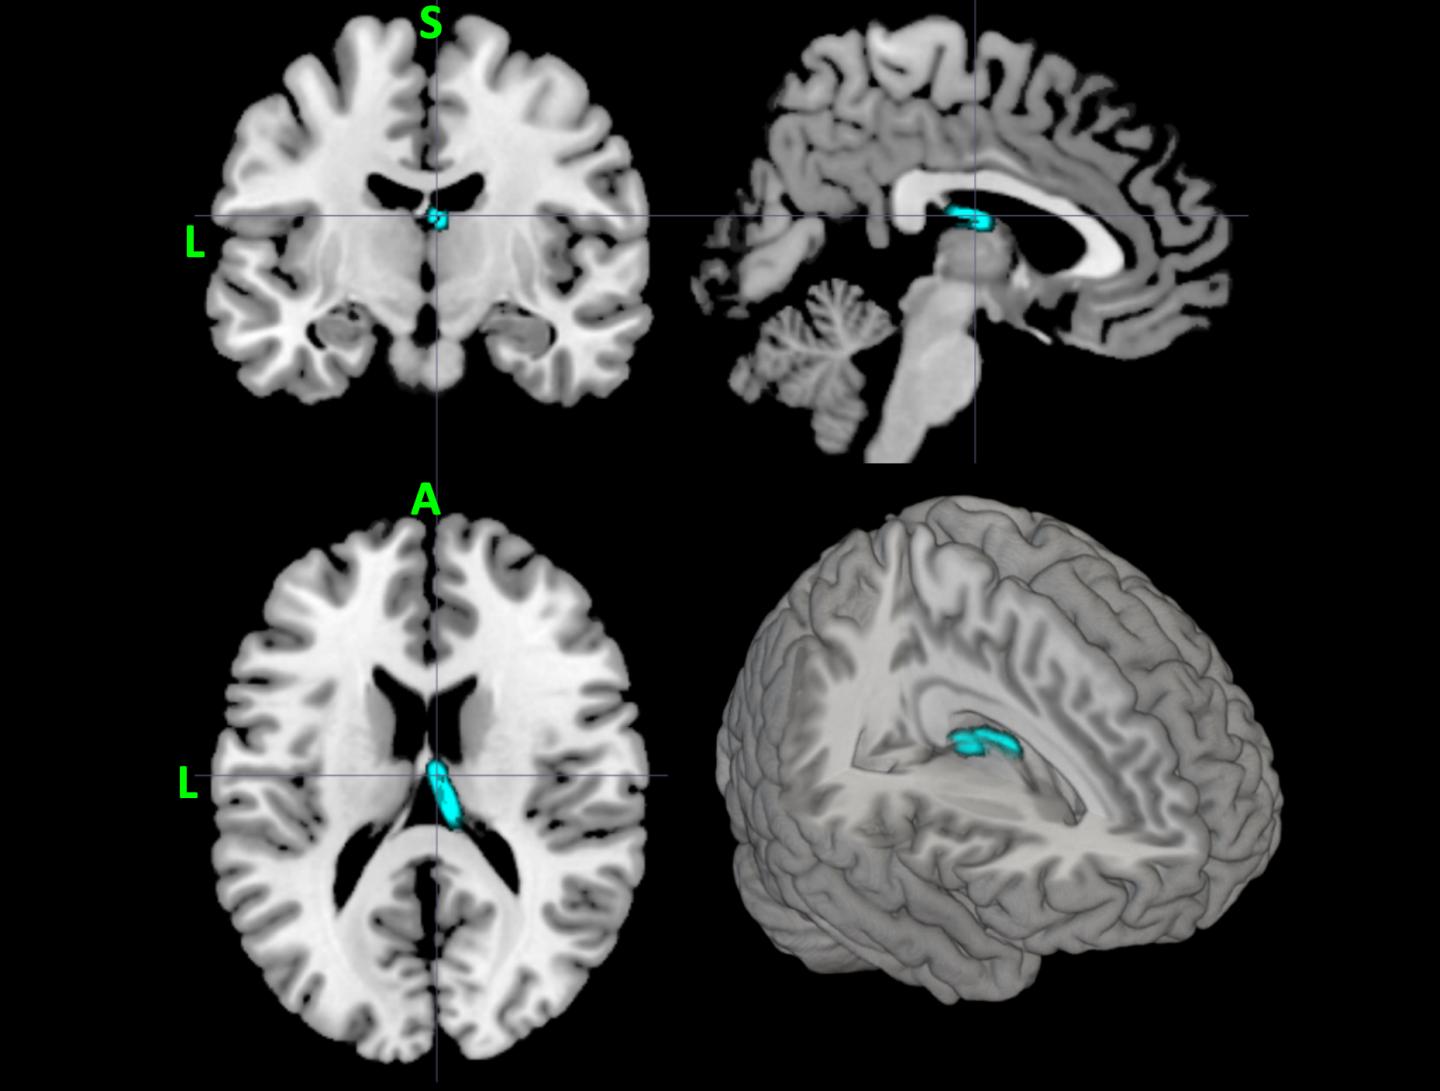 Neuroimaging Reveals Differences in Brain Activity of Those with Major Depressive Disorder